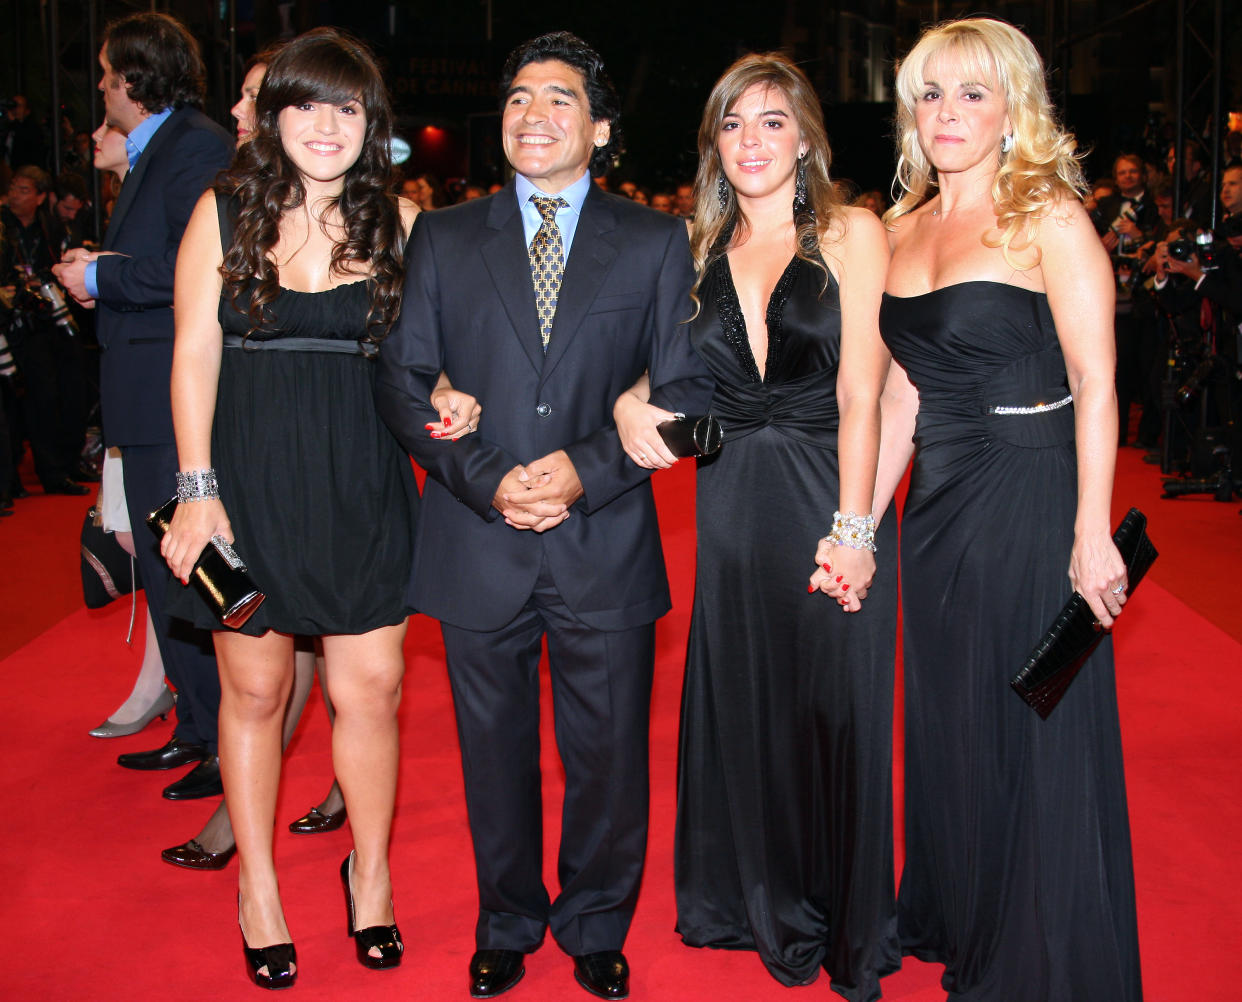 Former Argentinian football player Diego Maradona (C) poses with his wife Claudia (R) and daughters Giannina (L) and Dalma (R) as he arrives to attend the screening of Serbian director Emir Kusturica's documentary film 'Maradona by Kusturica' at the 61st Cannes International Film Festival on May 20, 2008 in Cannes, southern France. The May 14-25 festival winds up with the awards ceremony for the prestigious Palme d'Or, to be determined by a jury headed by Hollywood "bad boy" Sean Penn.    AFP PHOTO / Valery Hache (Photo by Valery HACHE / AFP) (Photo by VALERY HACHE/AFP via Getty Images)